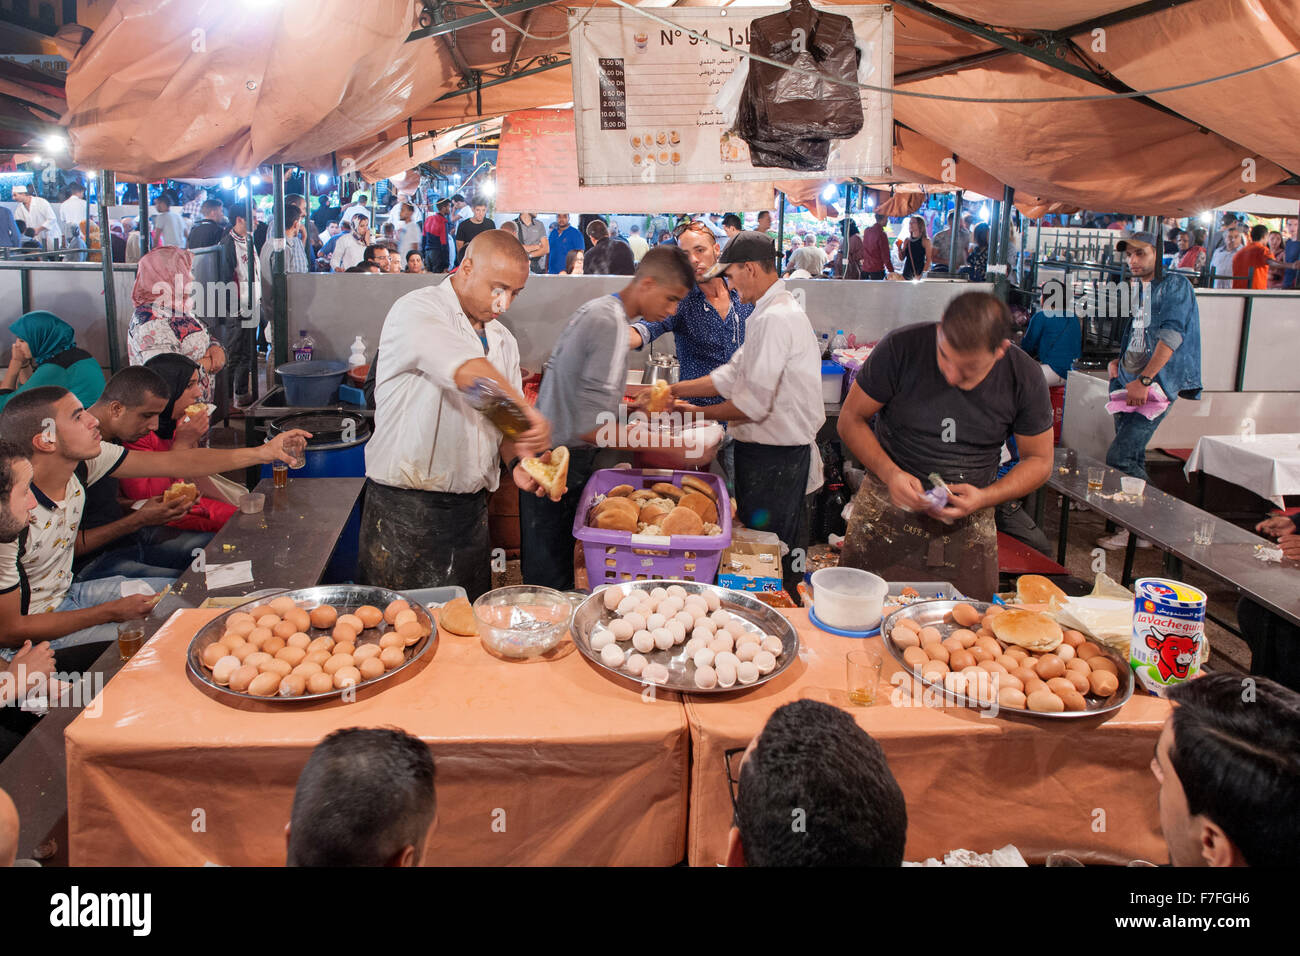 Food stall in Jemaa El Fna Square in Marrakech, Morocco. Stock Photo